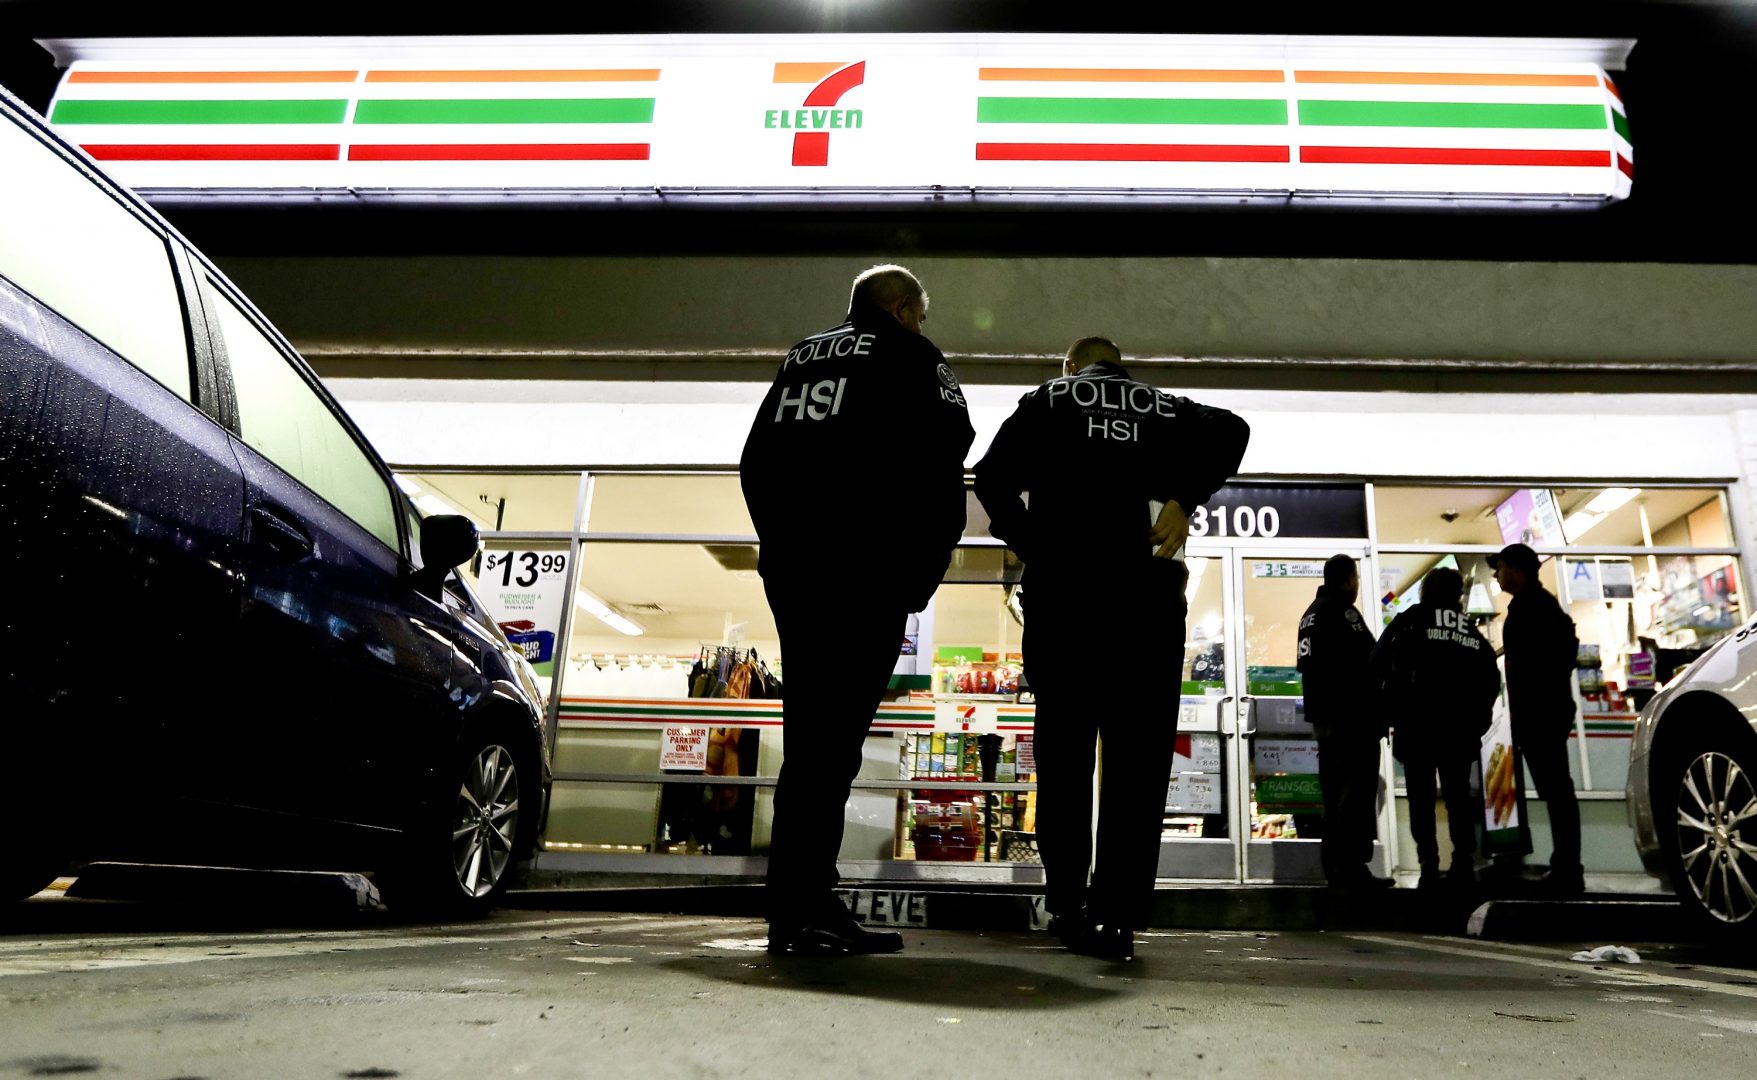 FILE - In this Jan. 10, 2018, file photo, U.S. Immigration and Customs Enforcement, ICE agents serve an employment audit notice at a 7-Eleven convenience store in Los Angeles. A federal judge has dismissed the federal government's claim that U.S. law trumps two California laws intended to protect immigrants who are in the country illegally. The ruling by U.S. District Judge John Mendez follows his ruling last week that found California was within its rights to pass two of the three sanctuary laws. He ruled Monday, July 9, 2018, that the federal government could proceed with its attempt to block part of a third California sanctuary law.